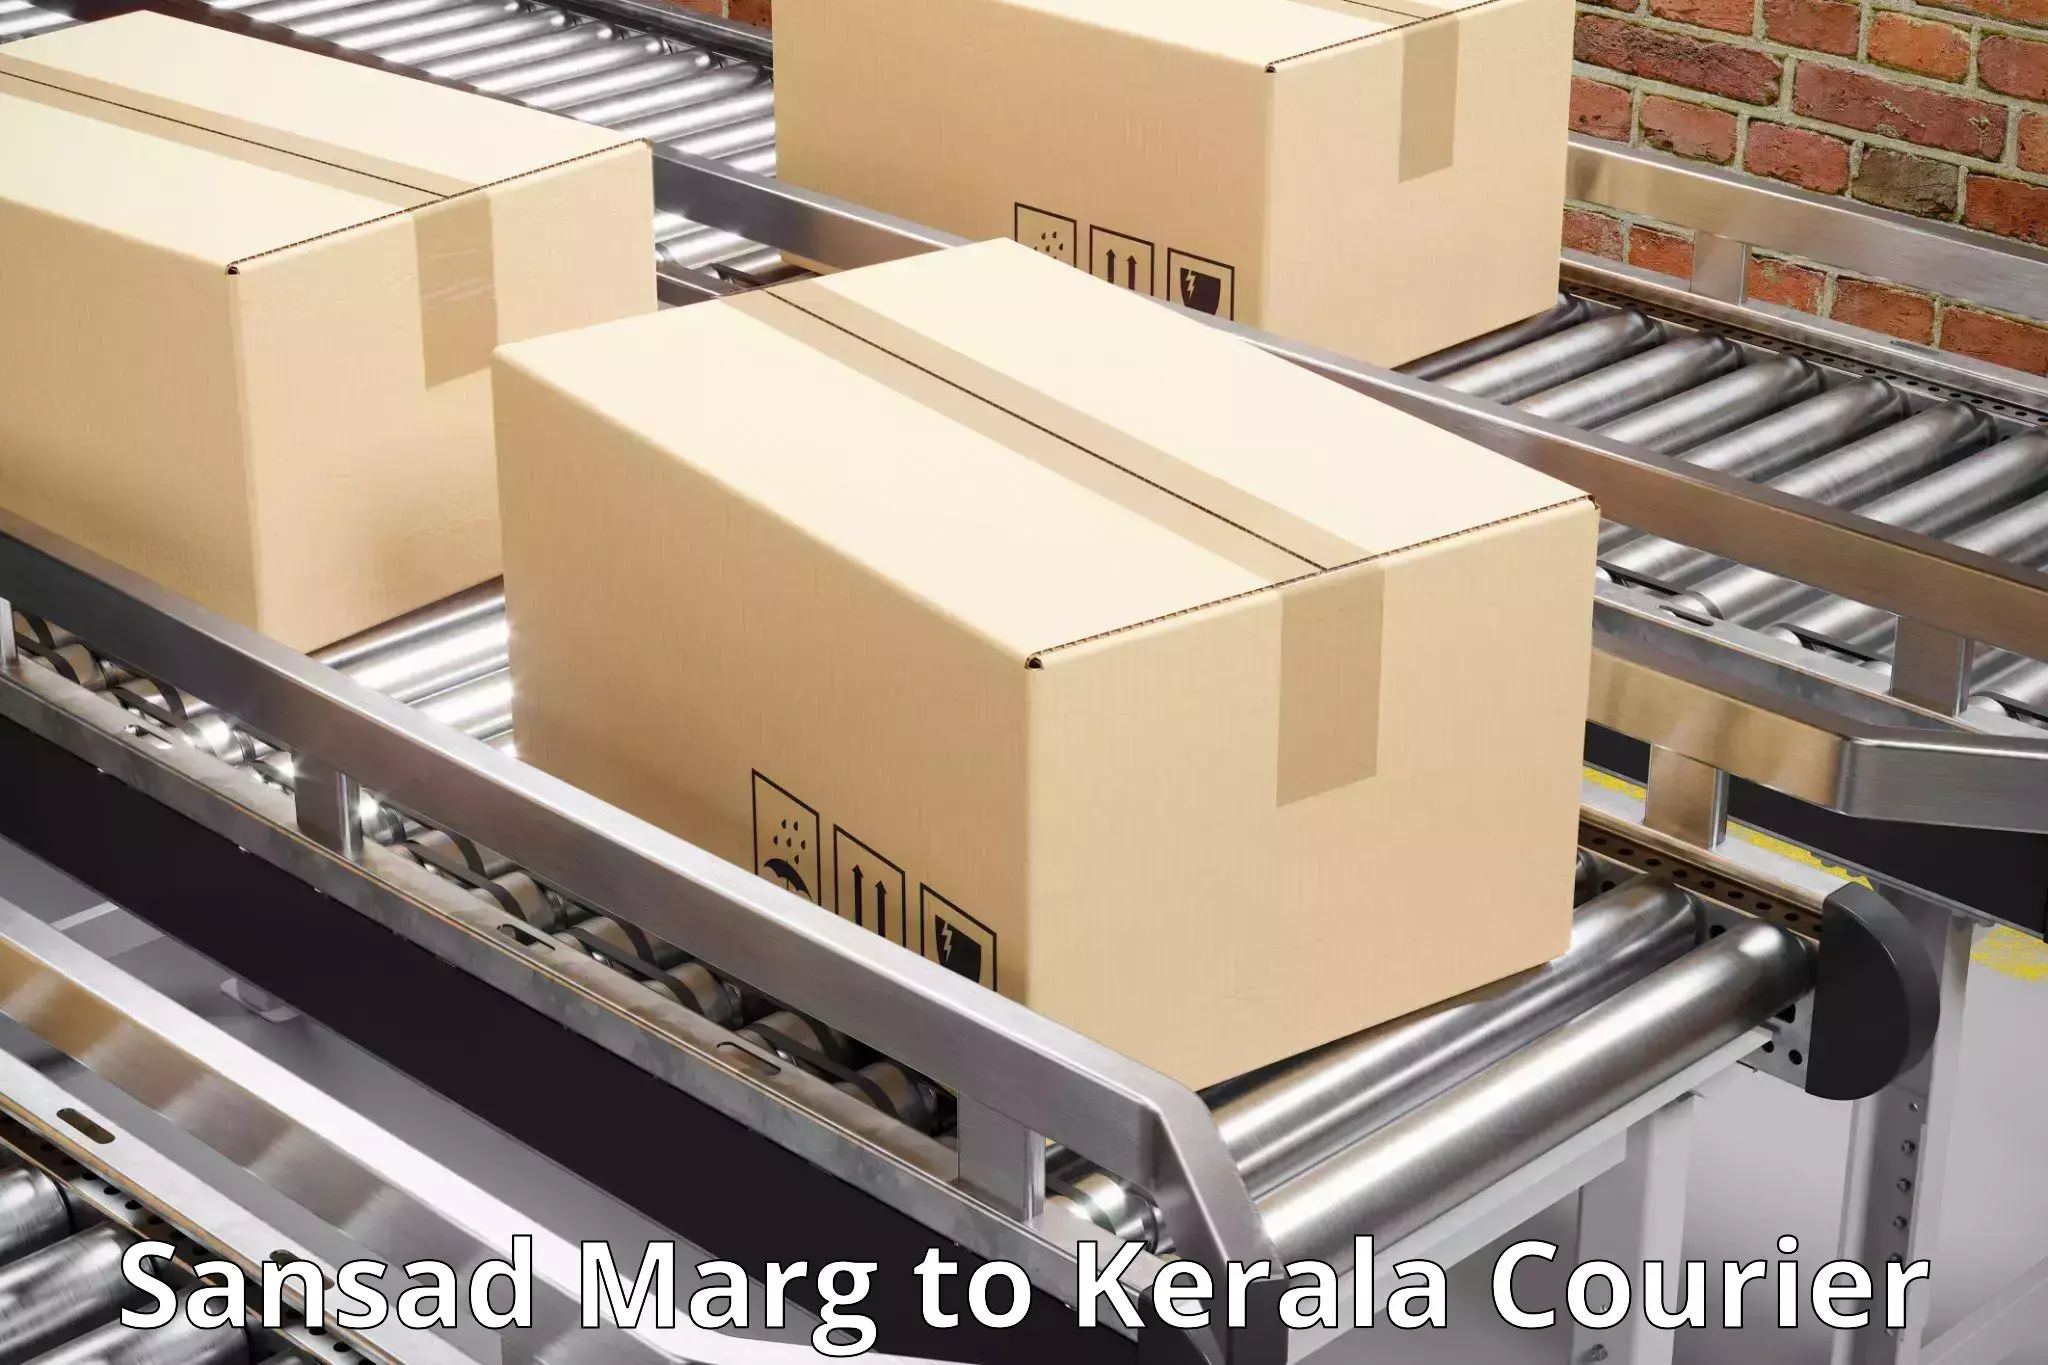 Quality courier services in Sansad Marg to Balussery